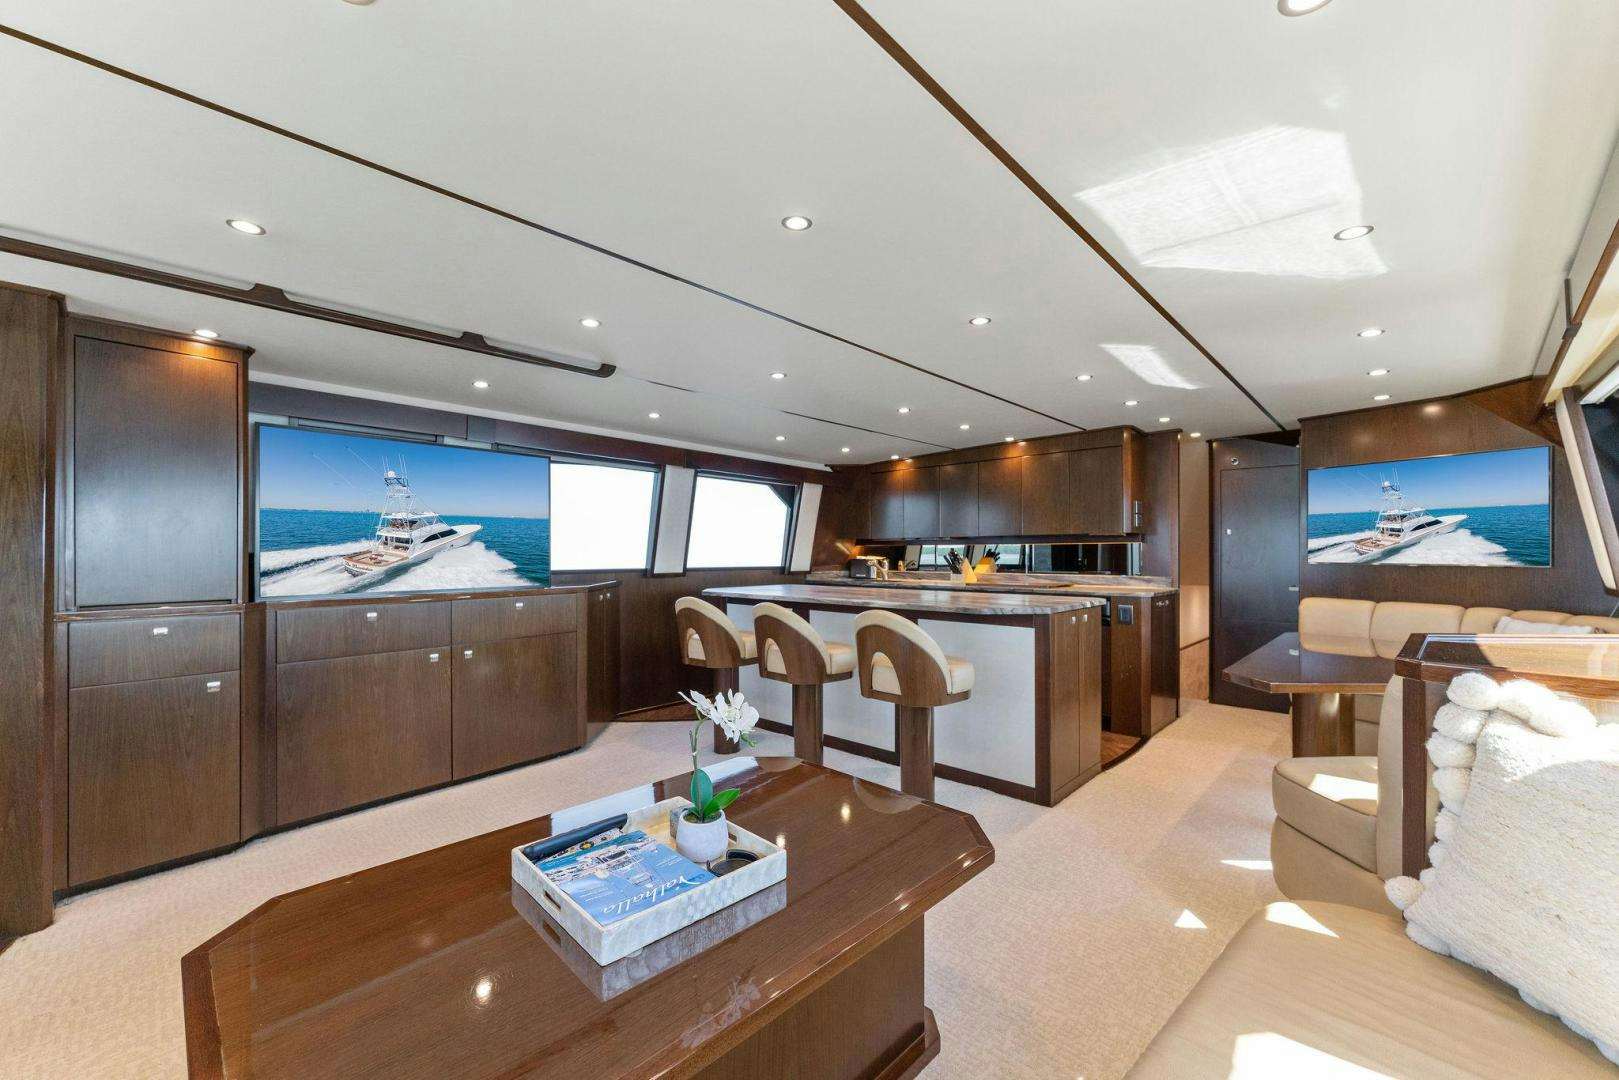 The provider
Yacht for Sale